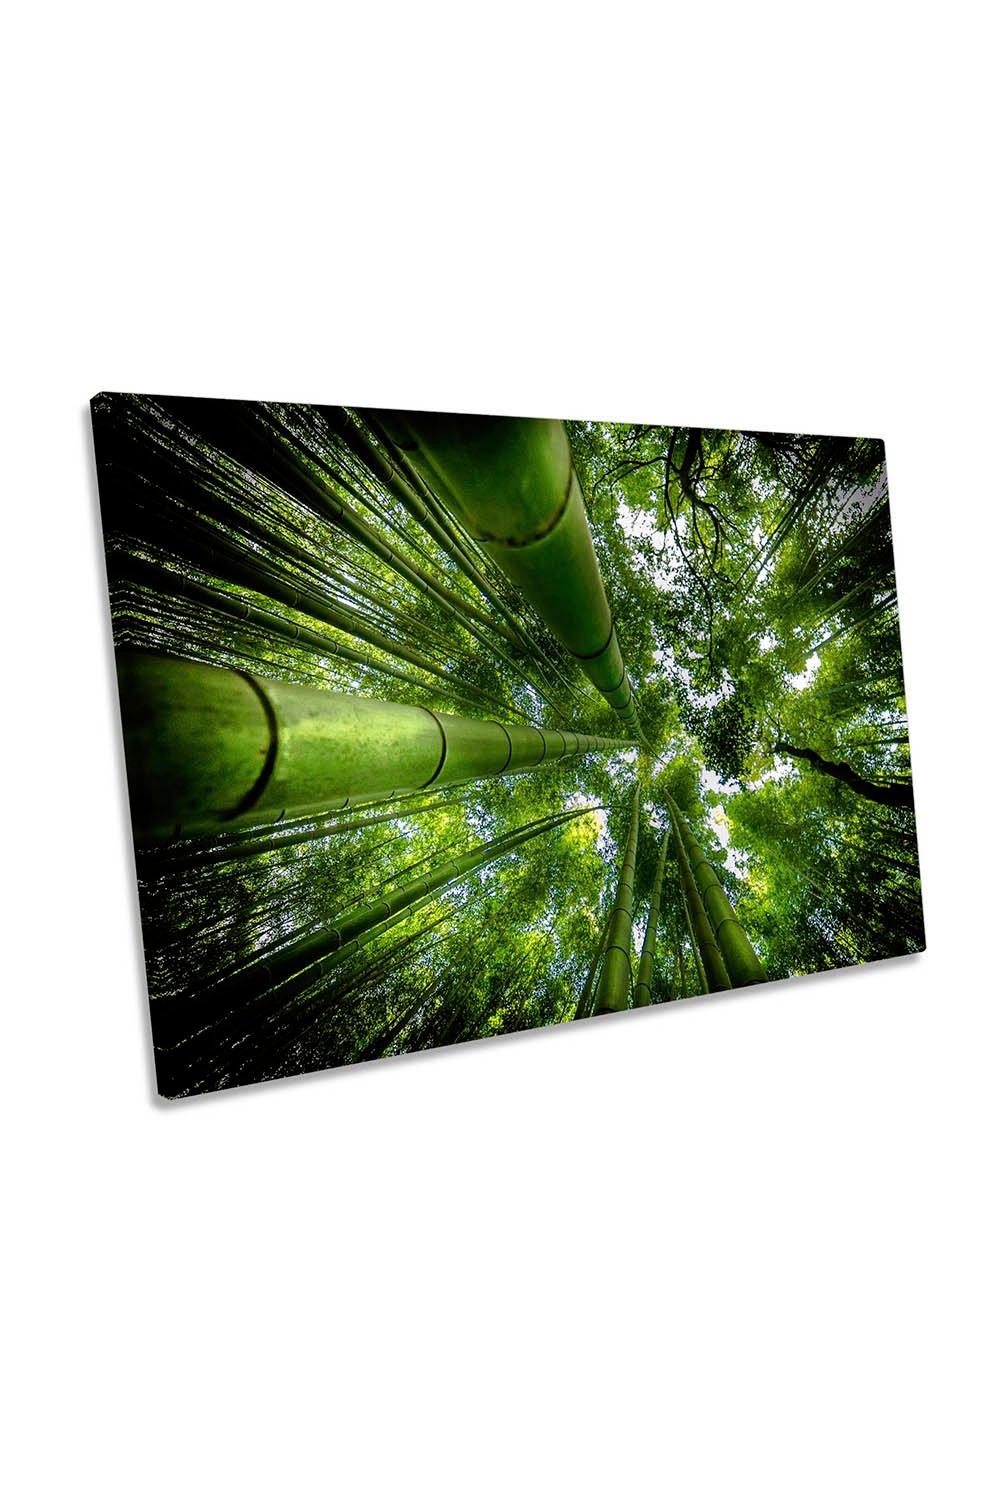 Bamboo Tree Tops Floral Green Canvas Wall Art Picture Print